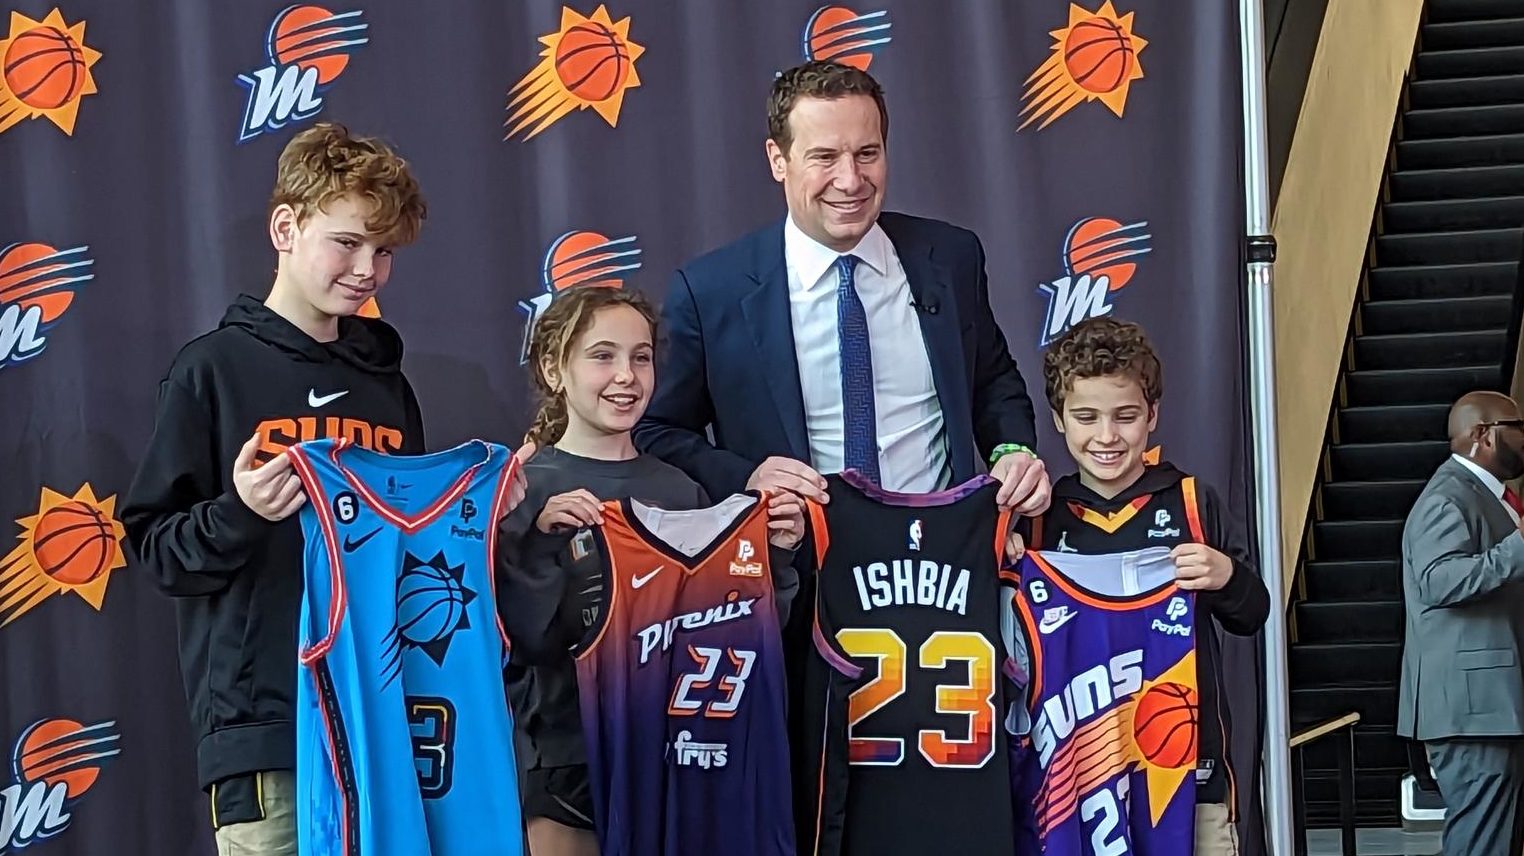 Suns owner Ishbia's culture commitment tested by Isiah Thomas report